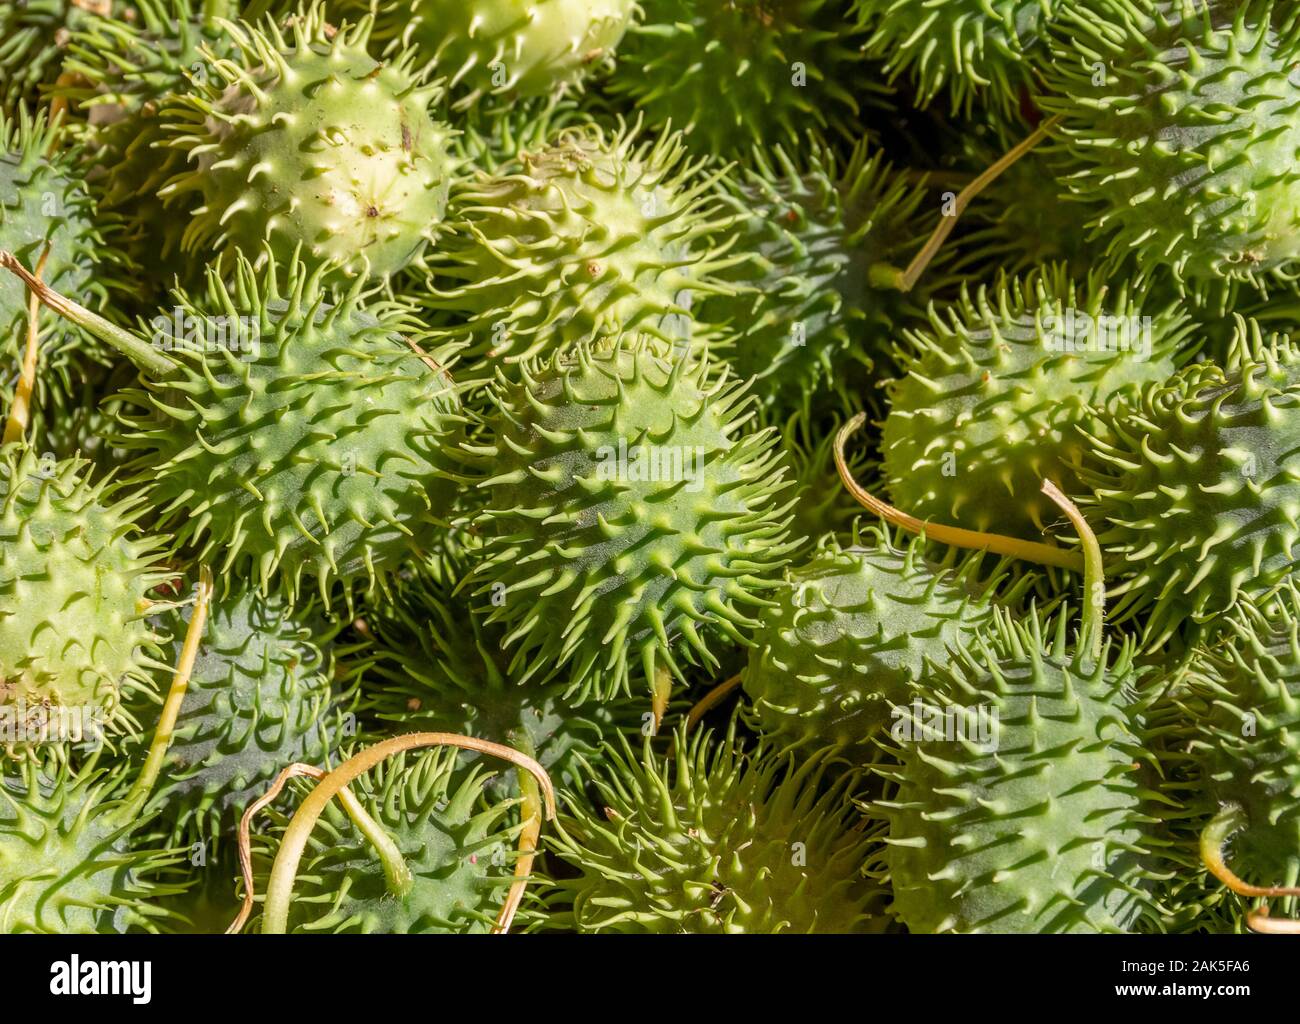 full frame picture showing lots of green spiky gherkins Stock Photo